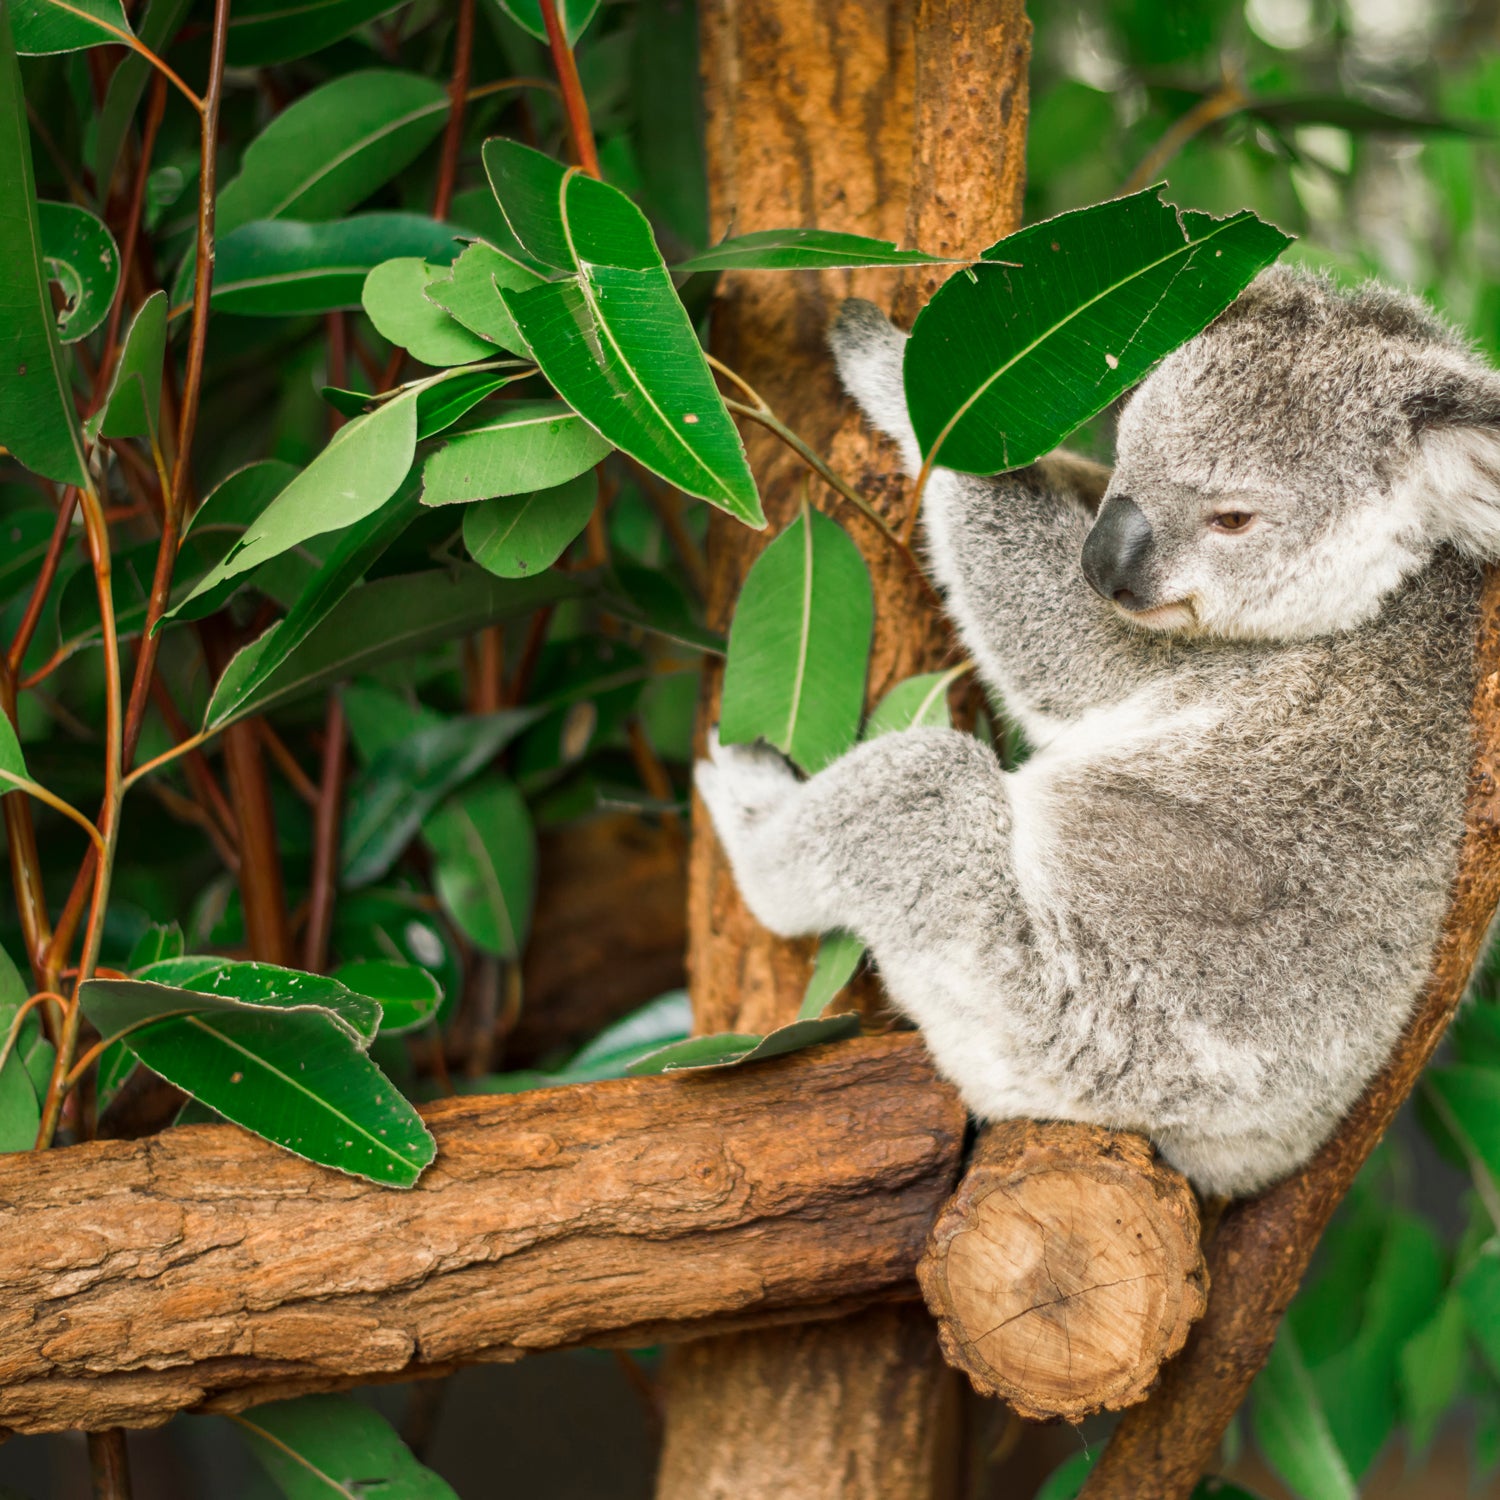 A photo of a koala bear in an Eucalyptus tree. Why is there a photo of a koala on a candle site? As everyone knows, Koalas love the "Eucalyptus Rain" scented Candle from Tuscany candle.